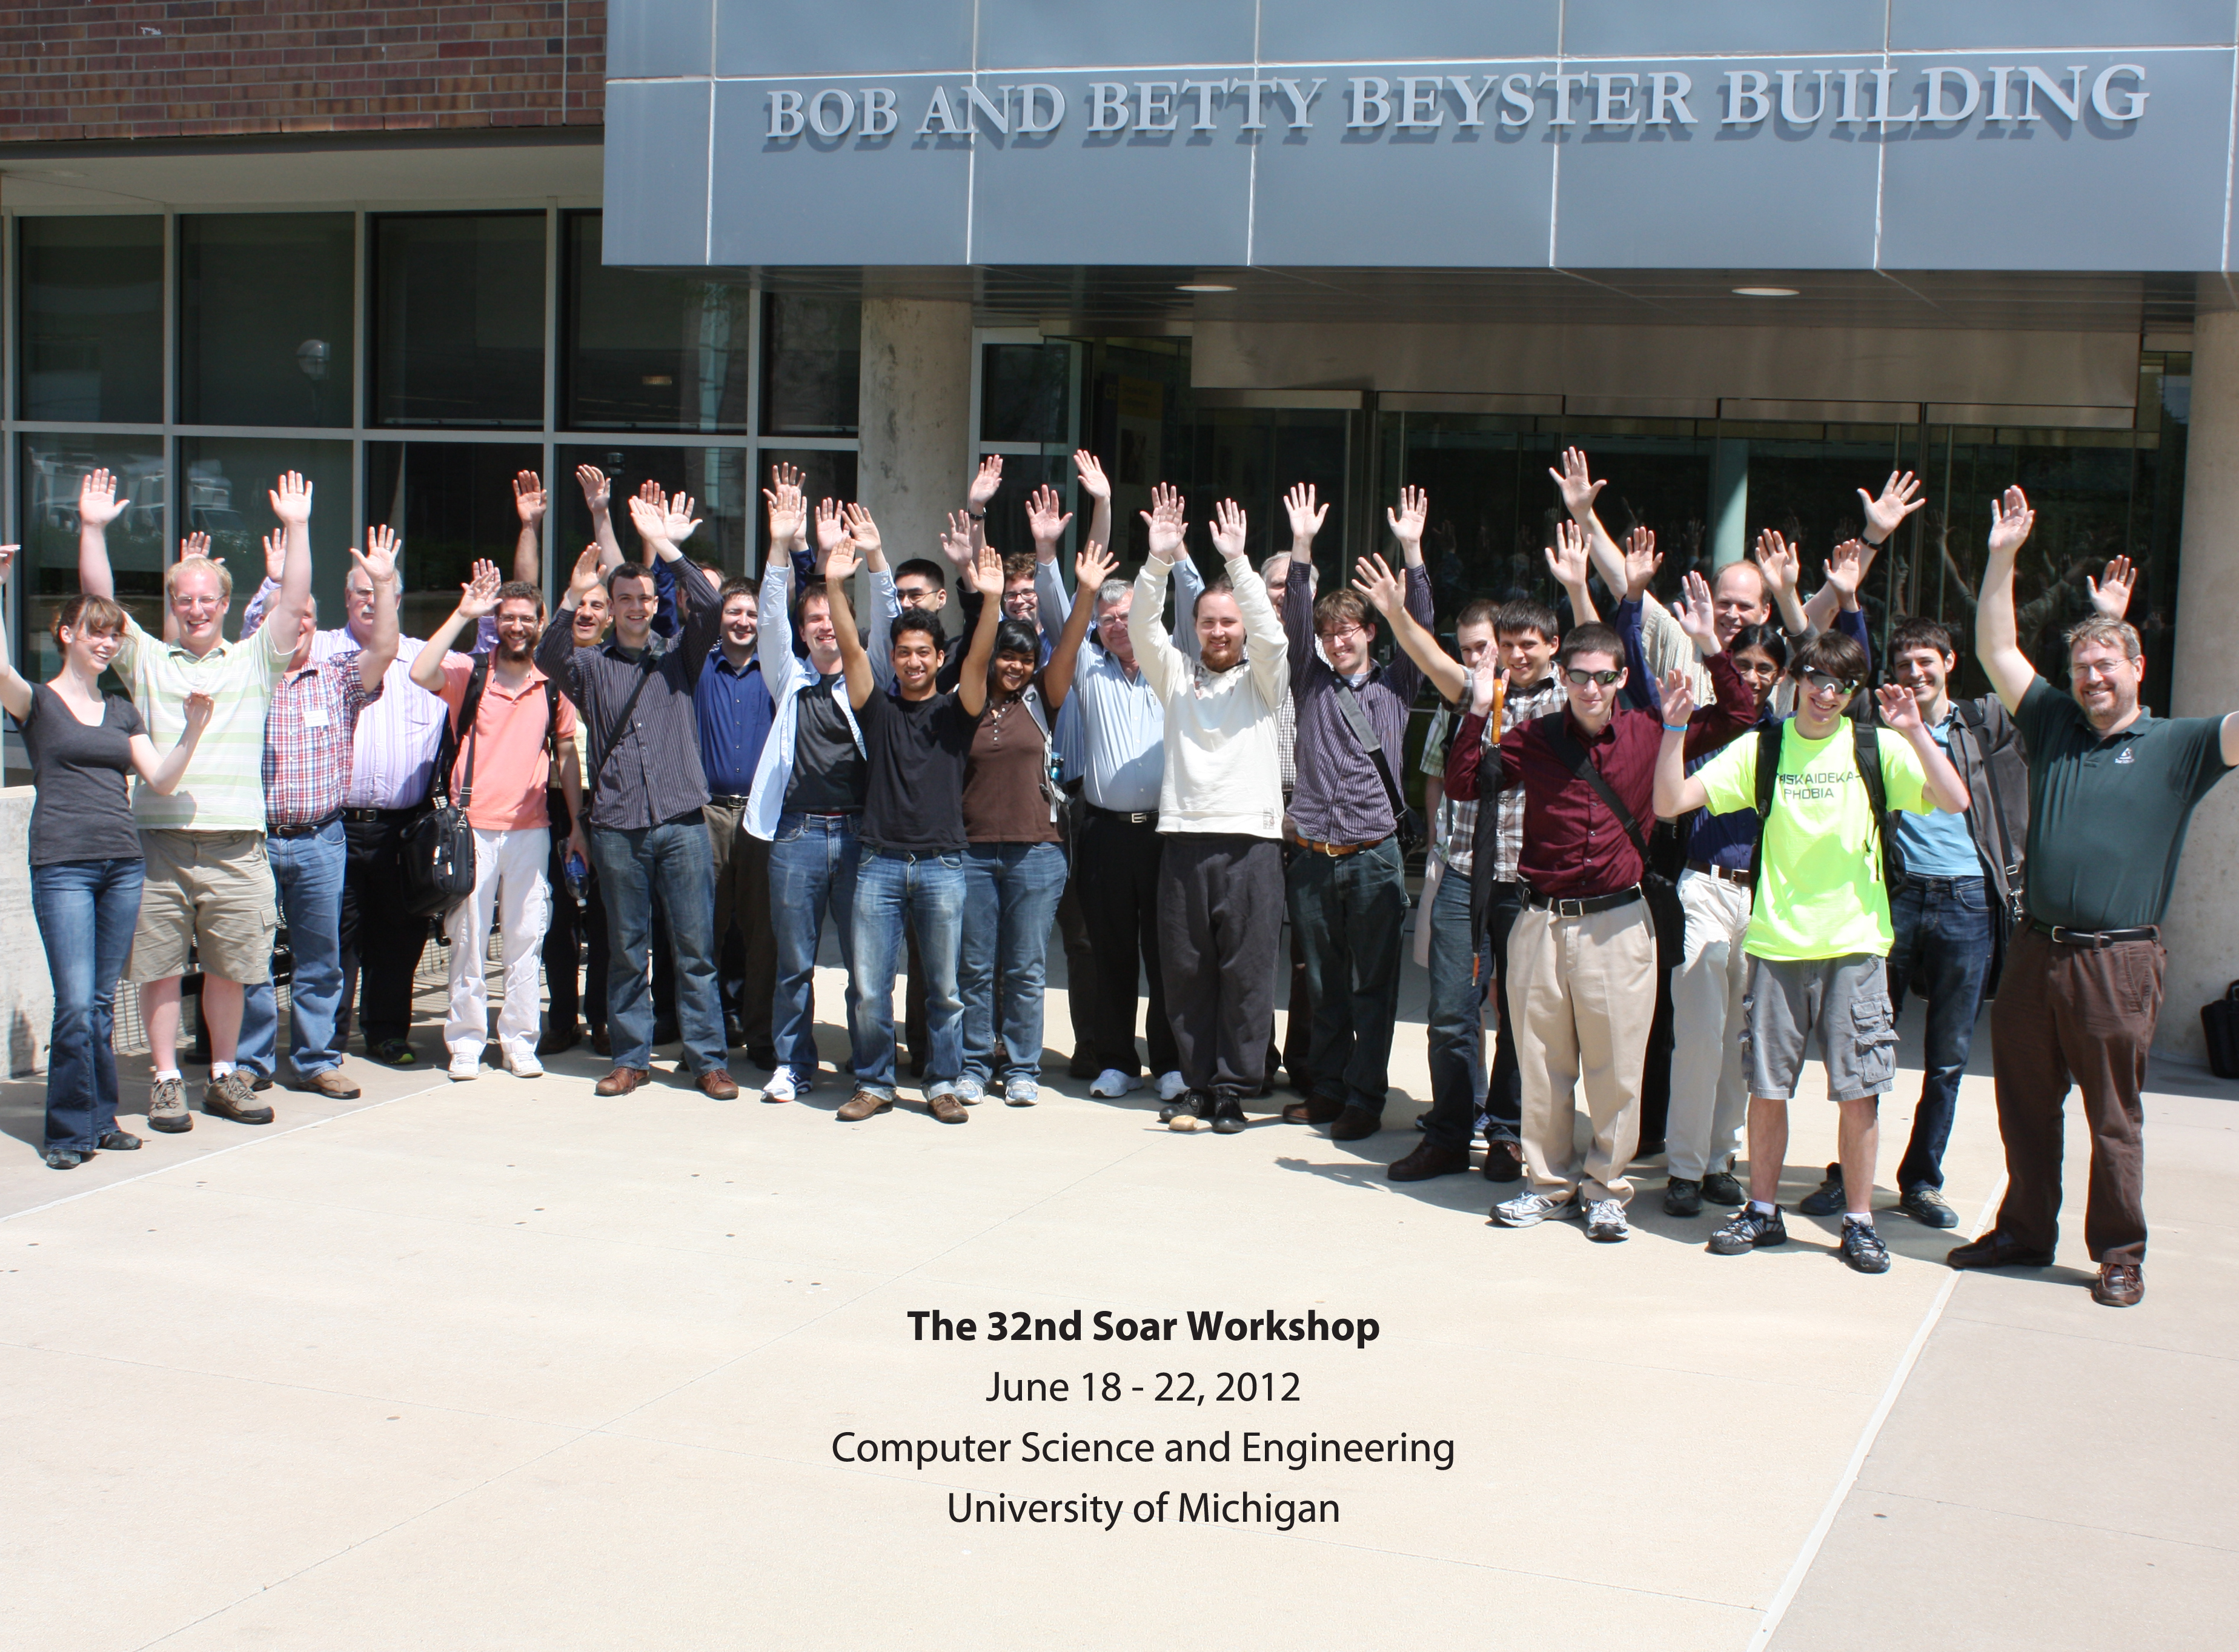 Participant group photo in front of Beyster building with arms raised (making waves), 2012